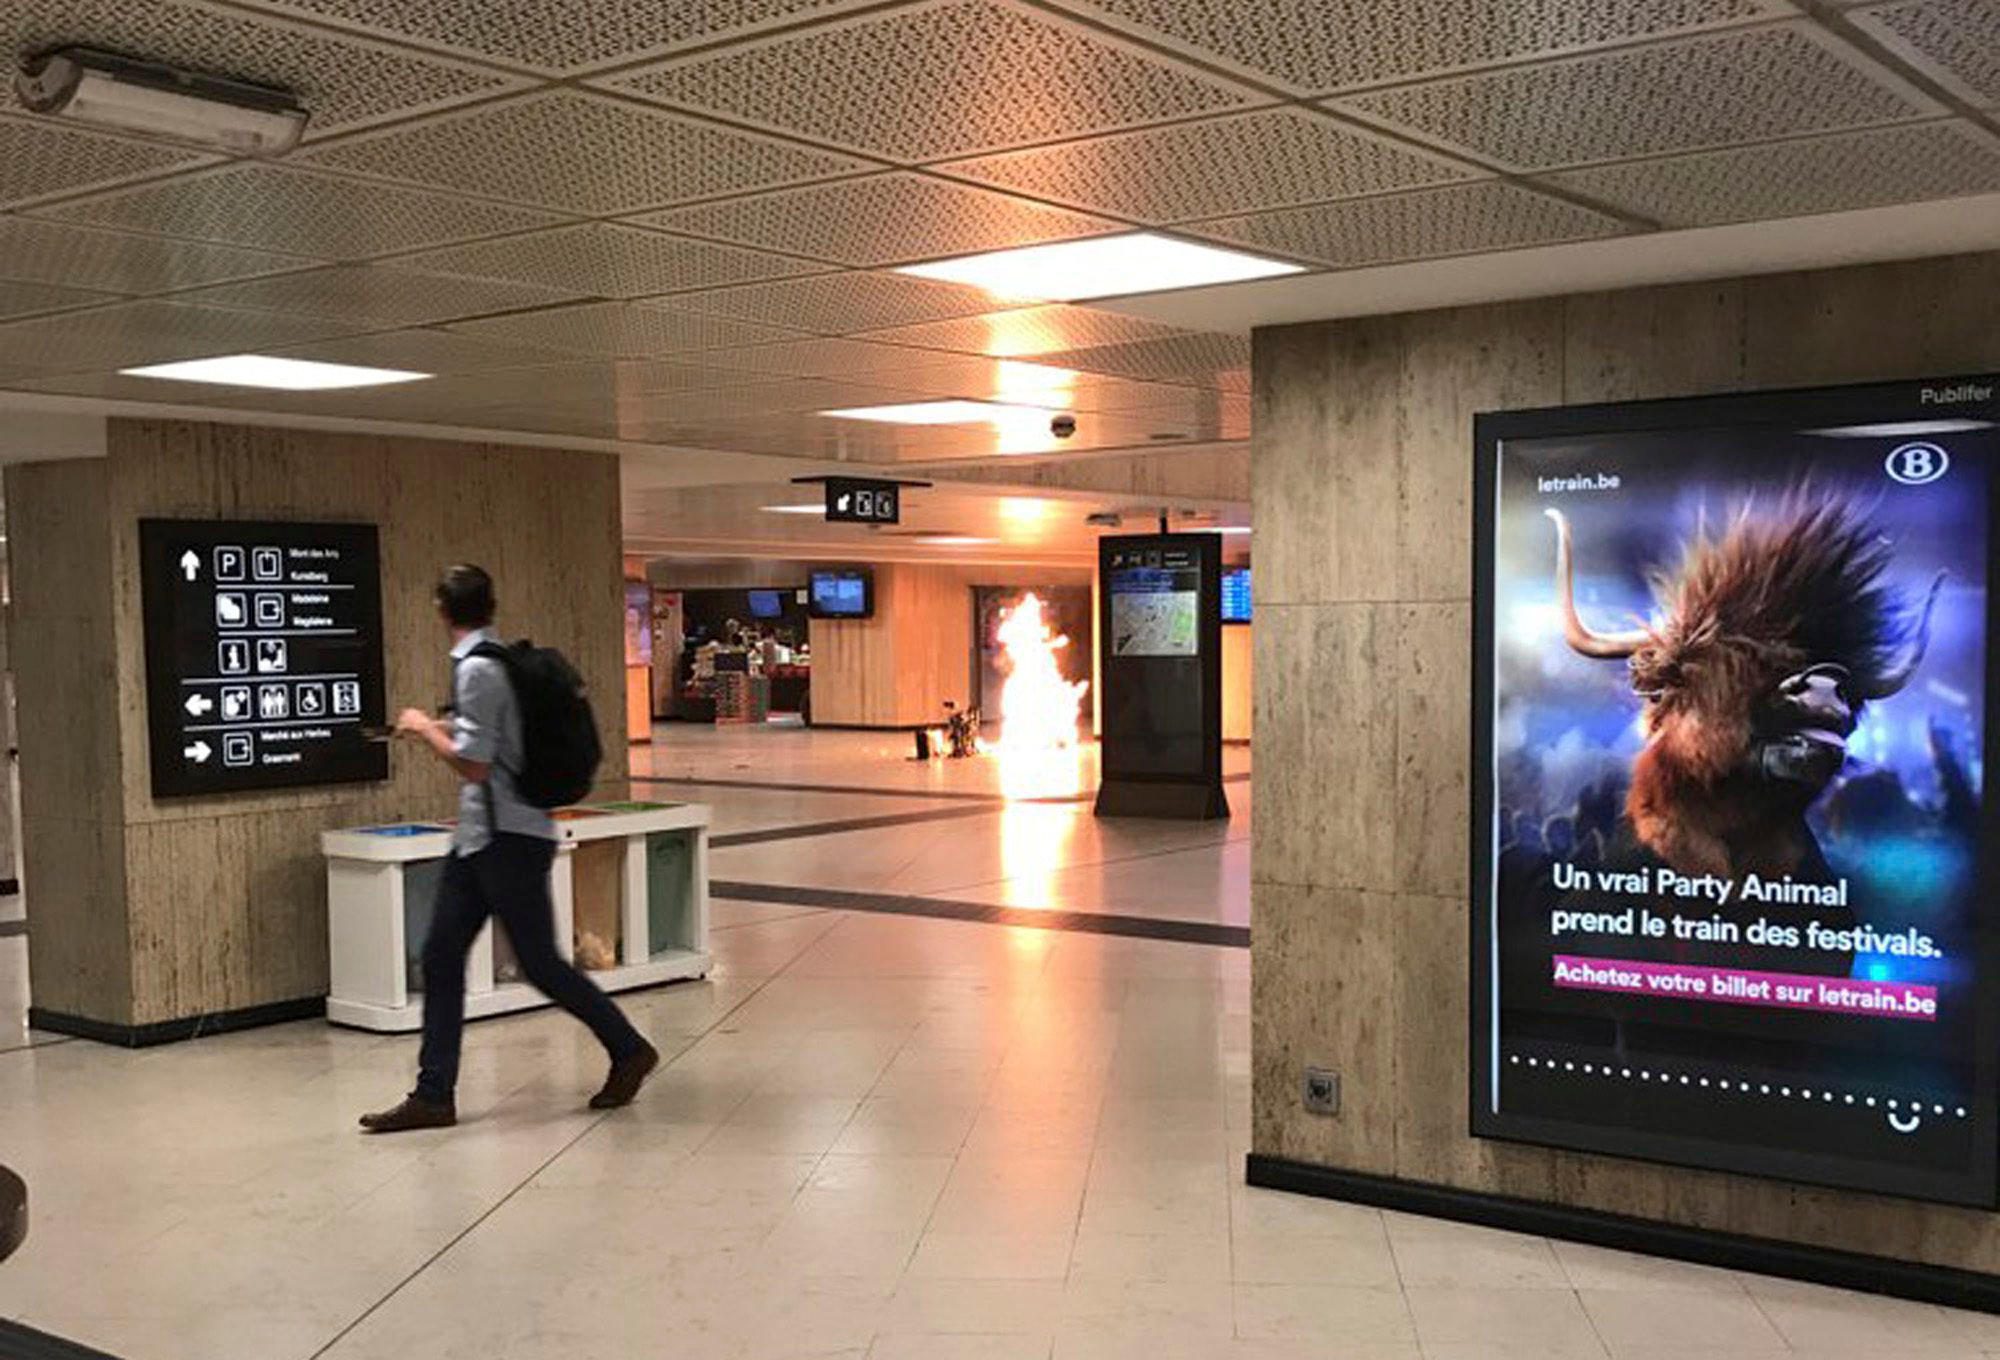 In this June 20, 2017 photo a man blows up an explosive device in the station in Brussels. The man was shot by soldiers afterwards in what prosecutors are treating as a "terrorist attack." He lay still for several hours while a bomb squad checked whether he was carrying more explosives and later died. No one else was hurt. (Remy Bonnaffe via AP)  MANDATORY CREDIT Belgium Station Explosion